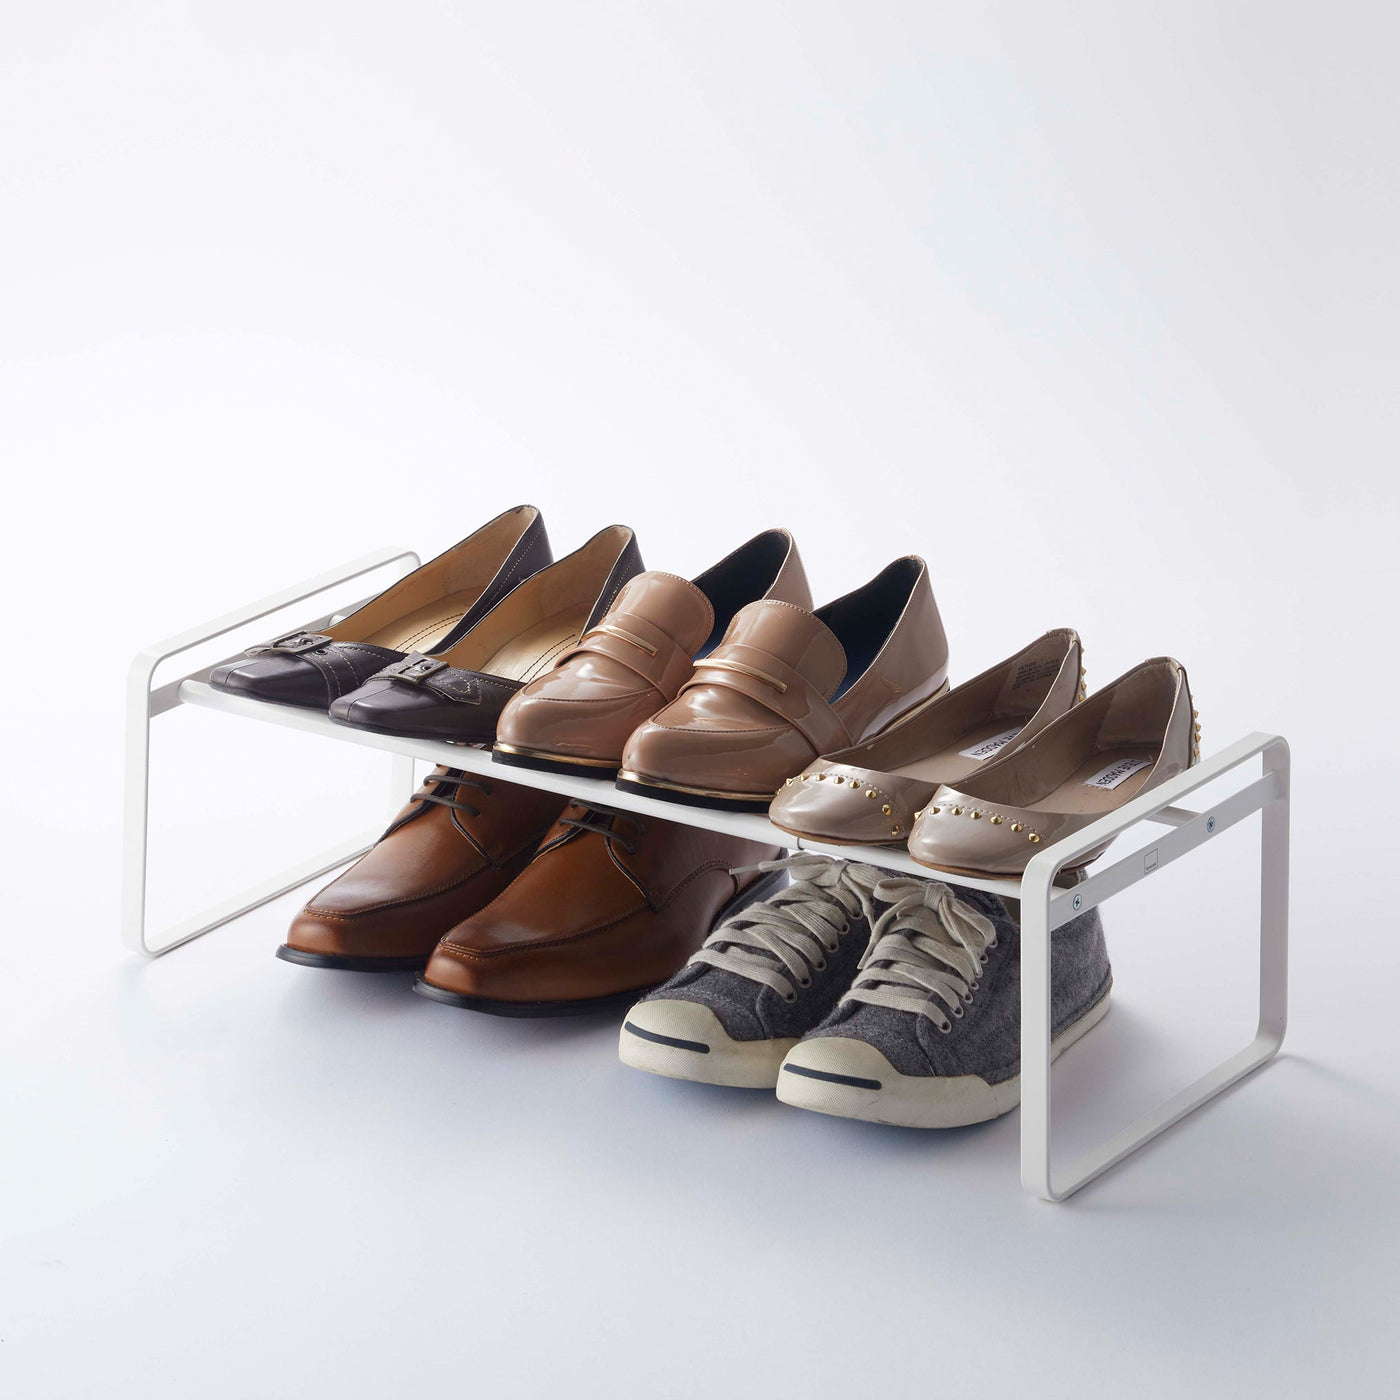 Seville Classics 3-Tier Metal Shoe Rack with Iron Frame, Brown, 27.25-in W  x 12.75-in D x 18.5-in H, Holds 12 Pairs of Shoes in the Shoe Storage  department at Lowes.com